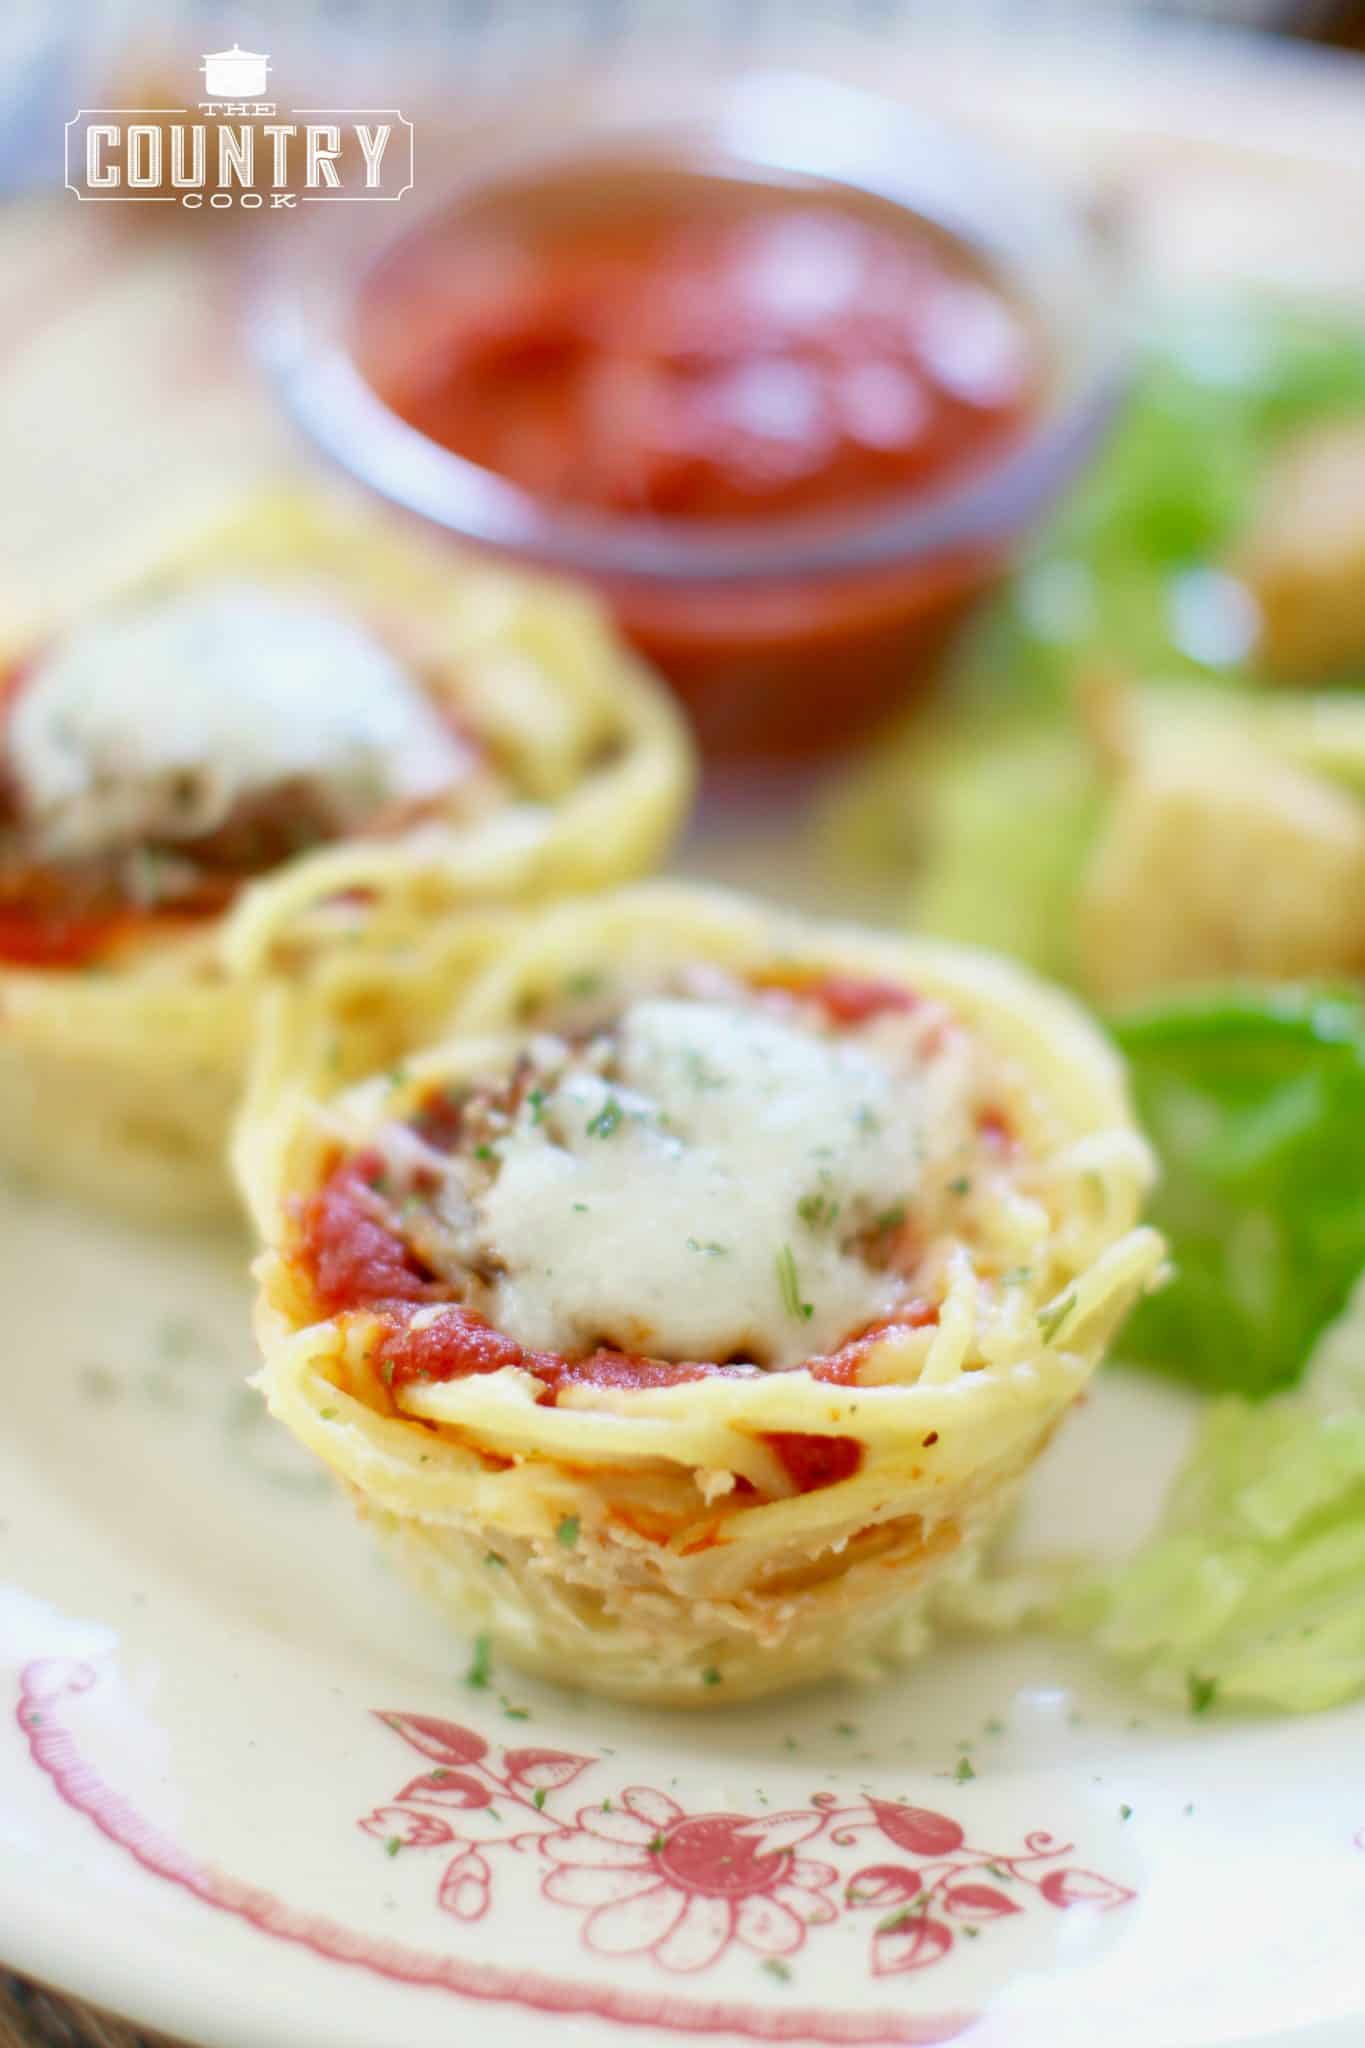 fully cooked spaghetti nests on a plate served with a salad and marinara sauce, sprinkled with parsley flakes.